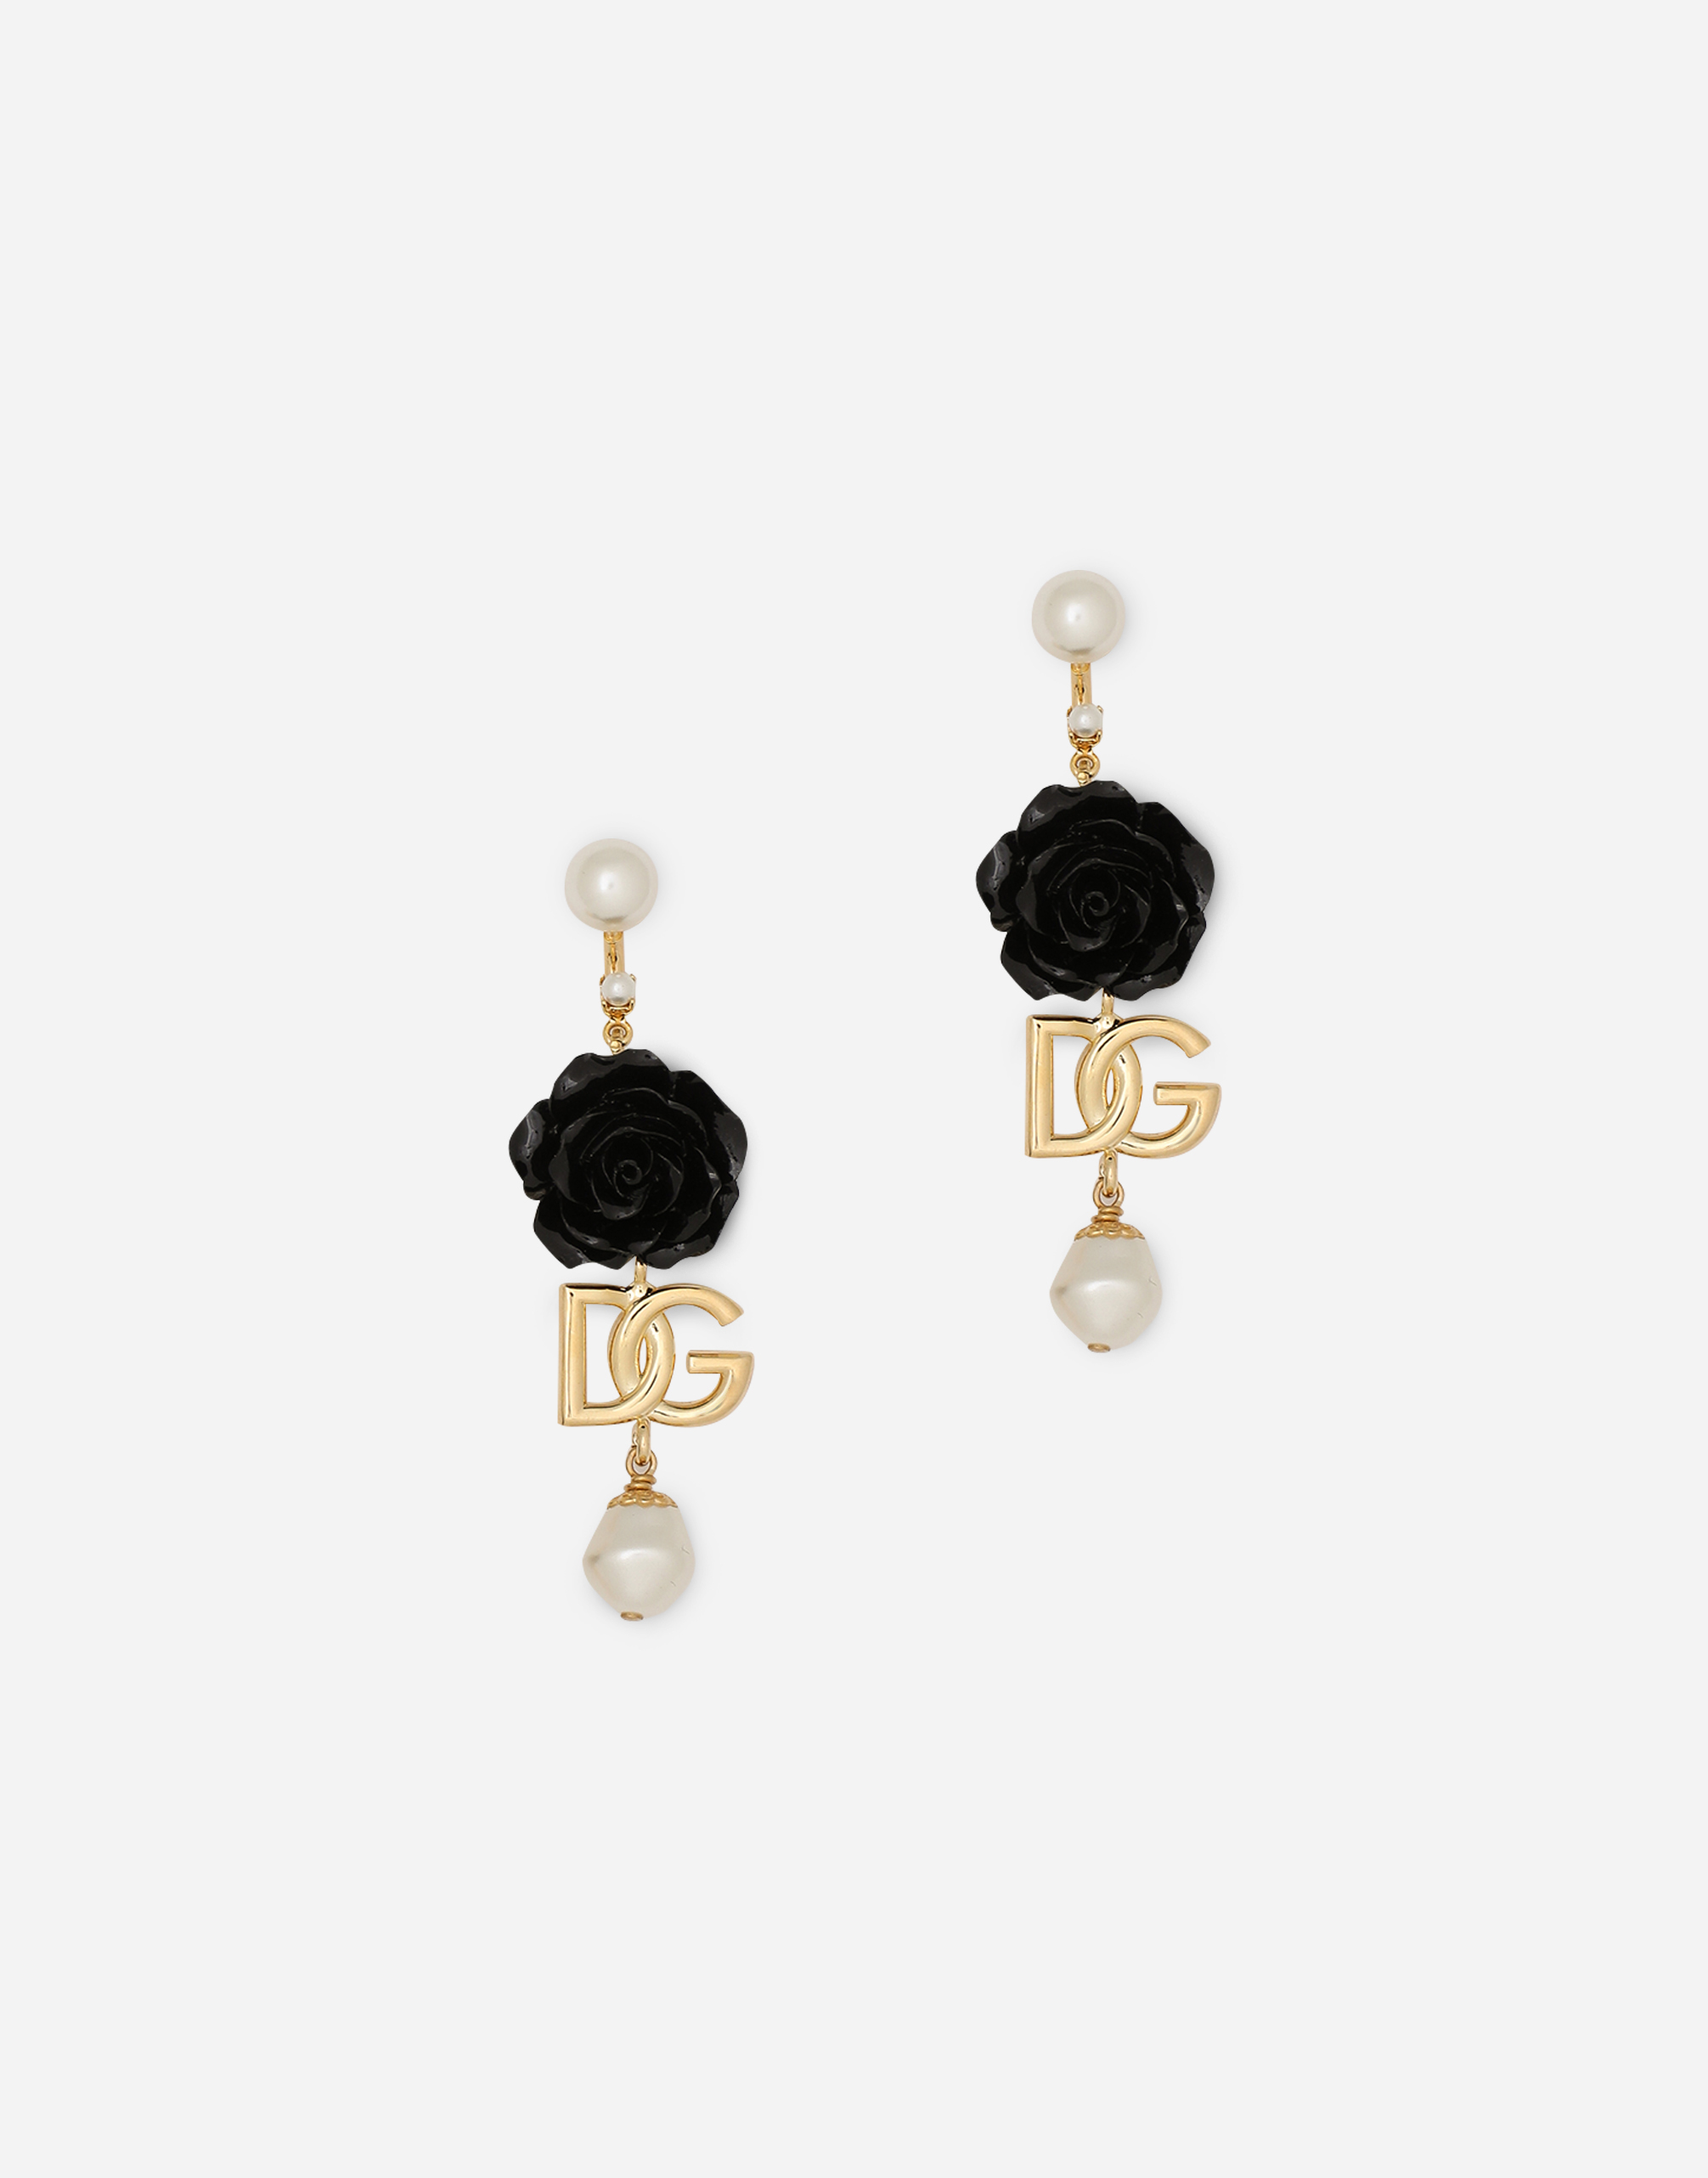 Drop earrings with roses and DG logo in Gold